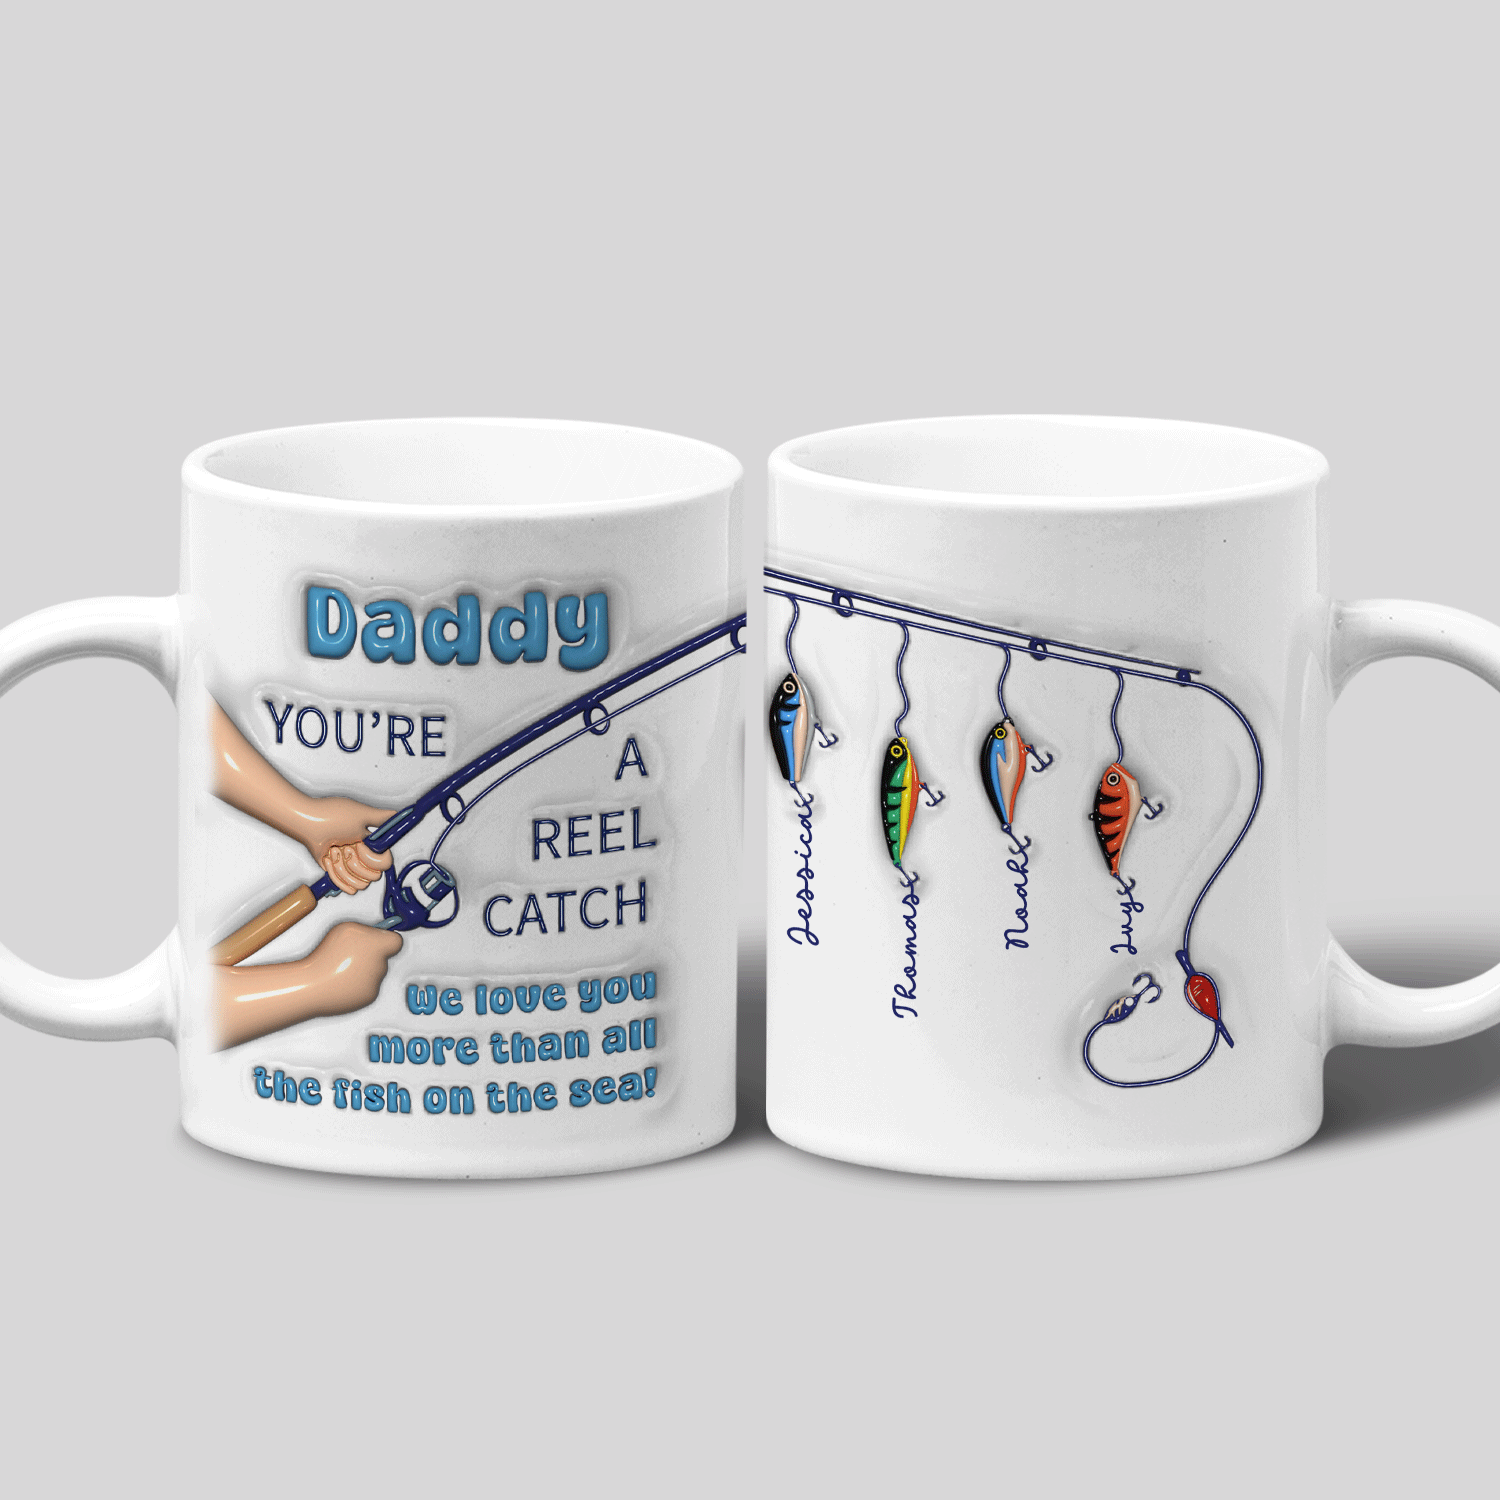 Daddy You're a Reel Catch, Custom 3D Inflated Effect Printed Mug